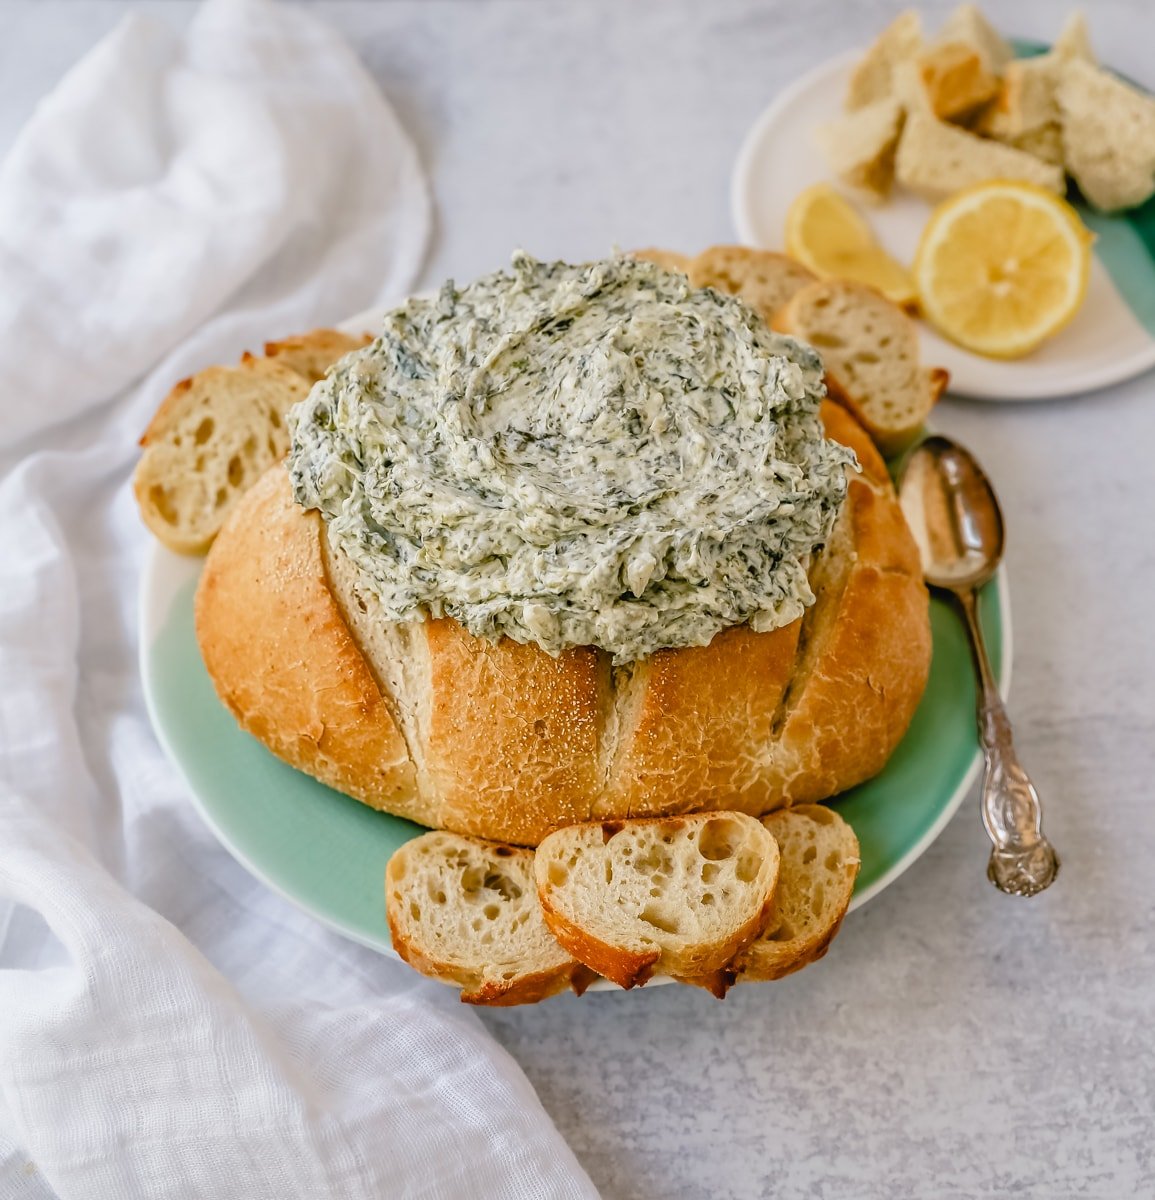 This easy spinach dip is made with spinach, cream cheese, sour cream, ranch powder, and water chestnuts. This cold spinach dip is made with only 5 ingredients and is always a hit at parties!